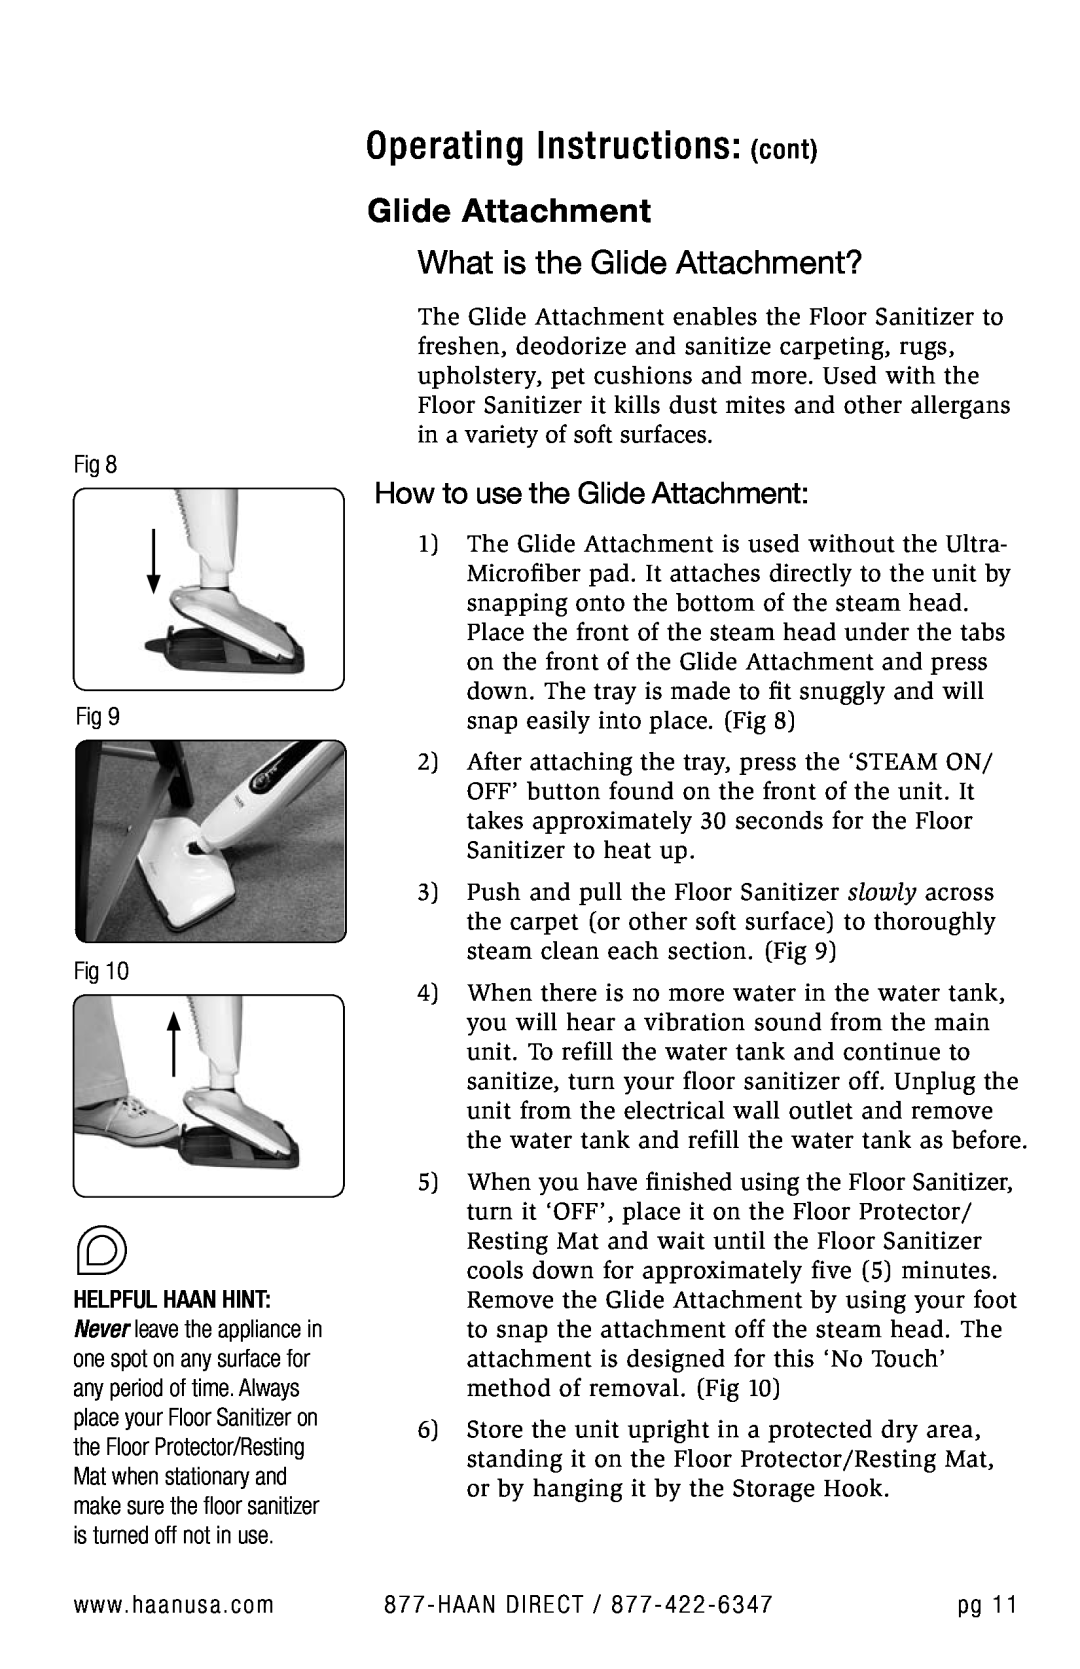 Haan SI-35 user manual What is the Glide Attachment?, How to use the Glide Attachment, Operating Instructions cont 